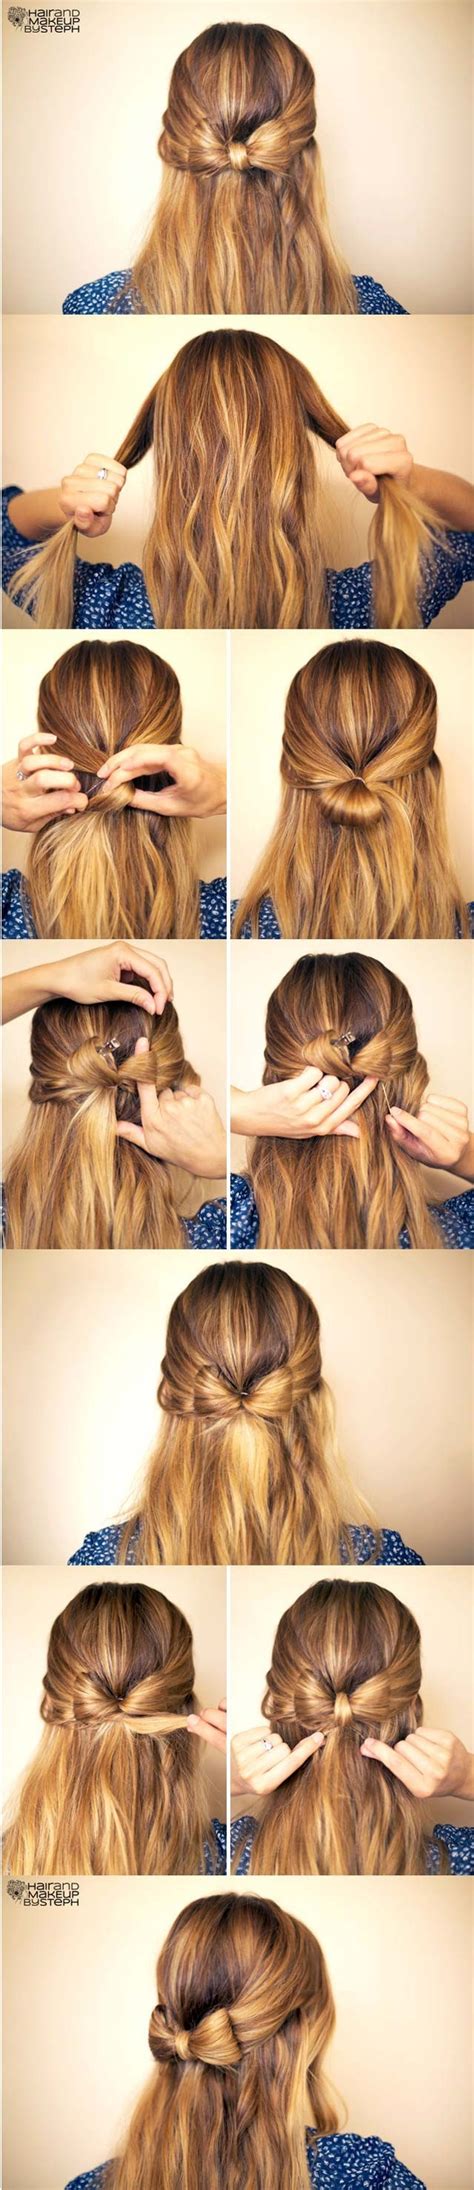 Discover more posts about bow hairstyle. 19 Pretty Long Hairstyles with Tutorials - Pretty Designs